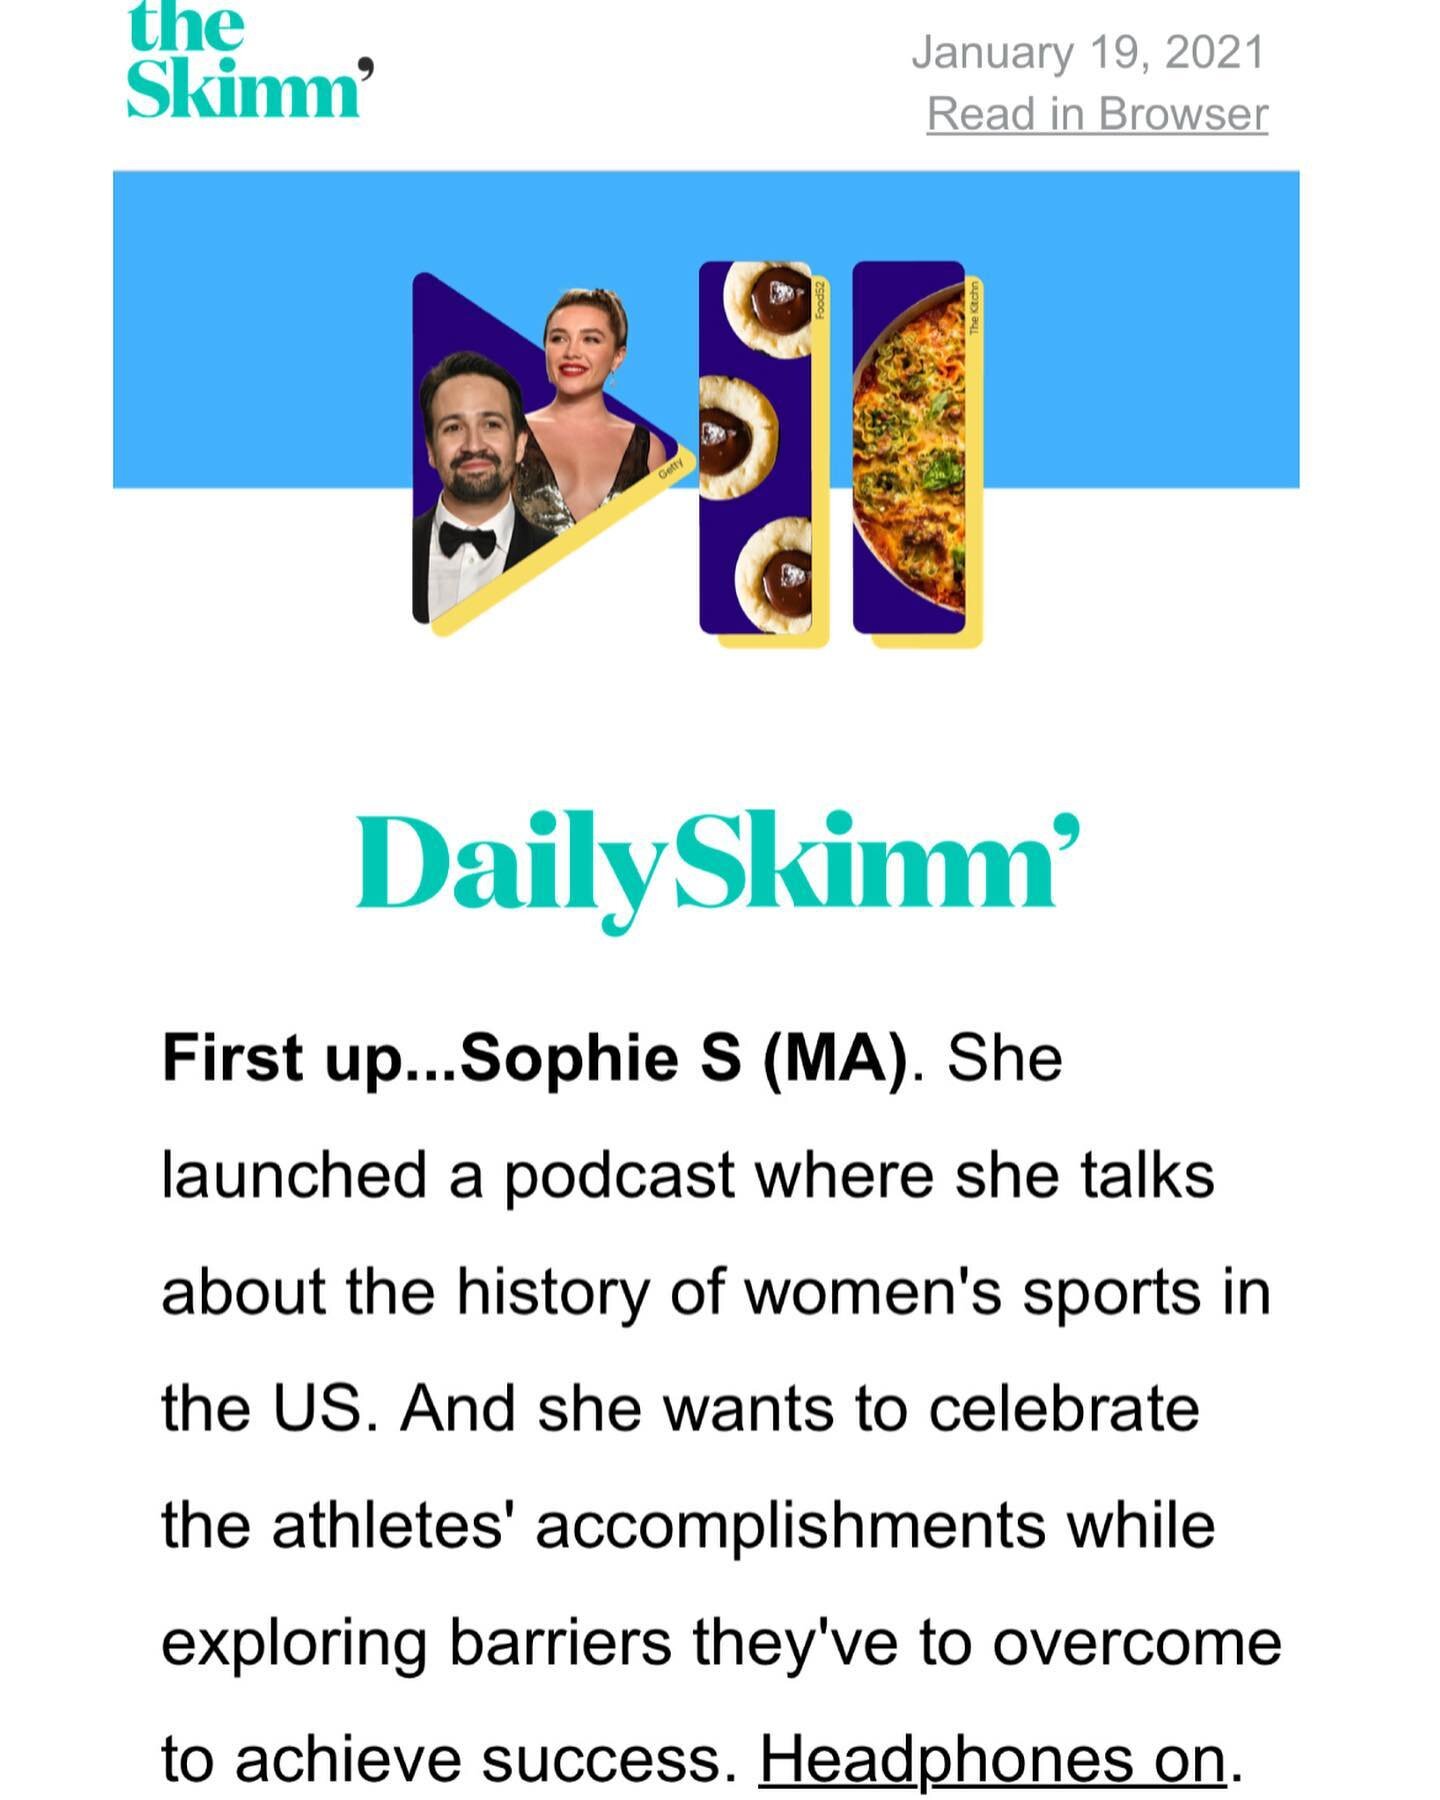 So proud to be featured in @theskimm !!!!!